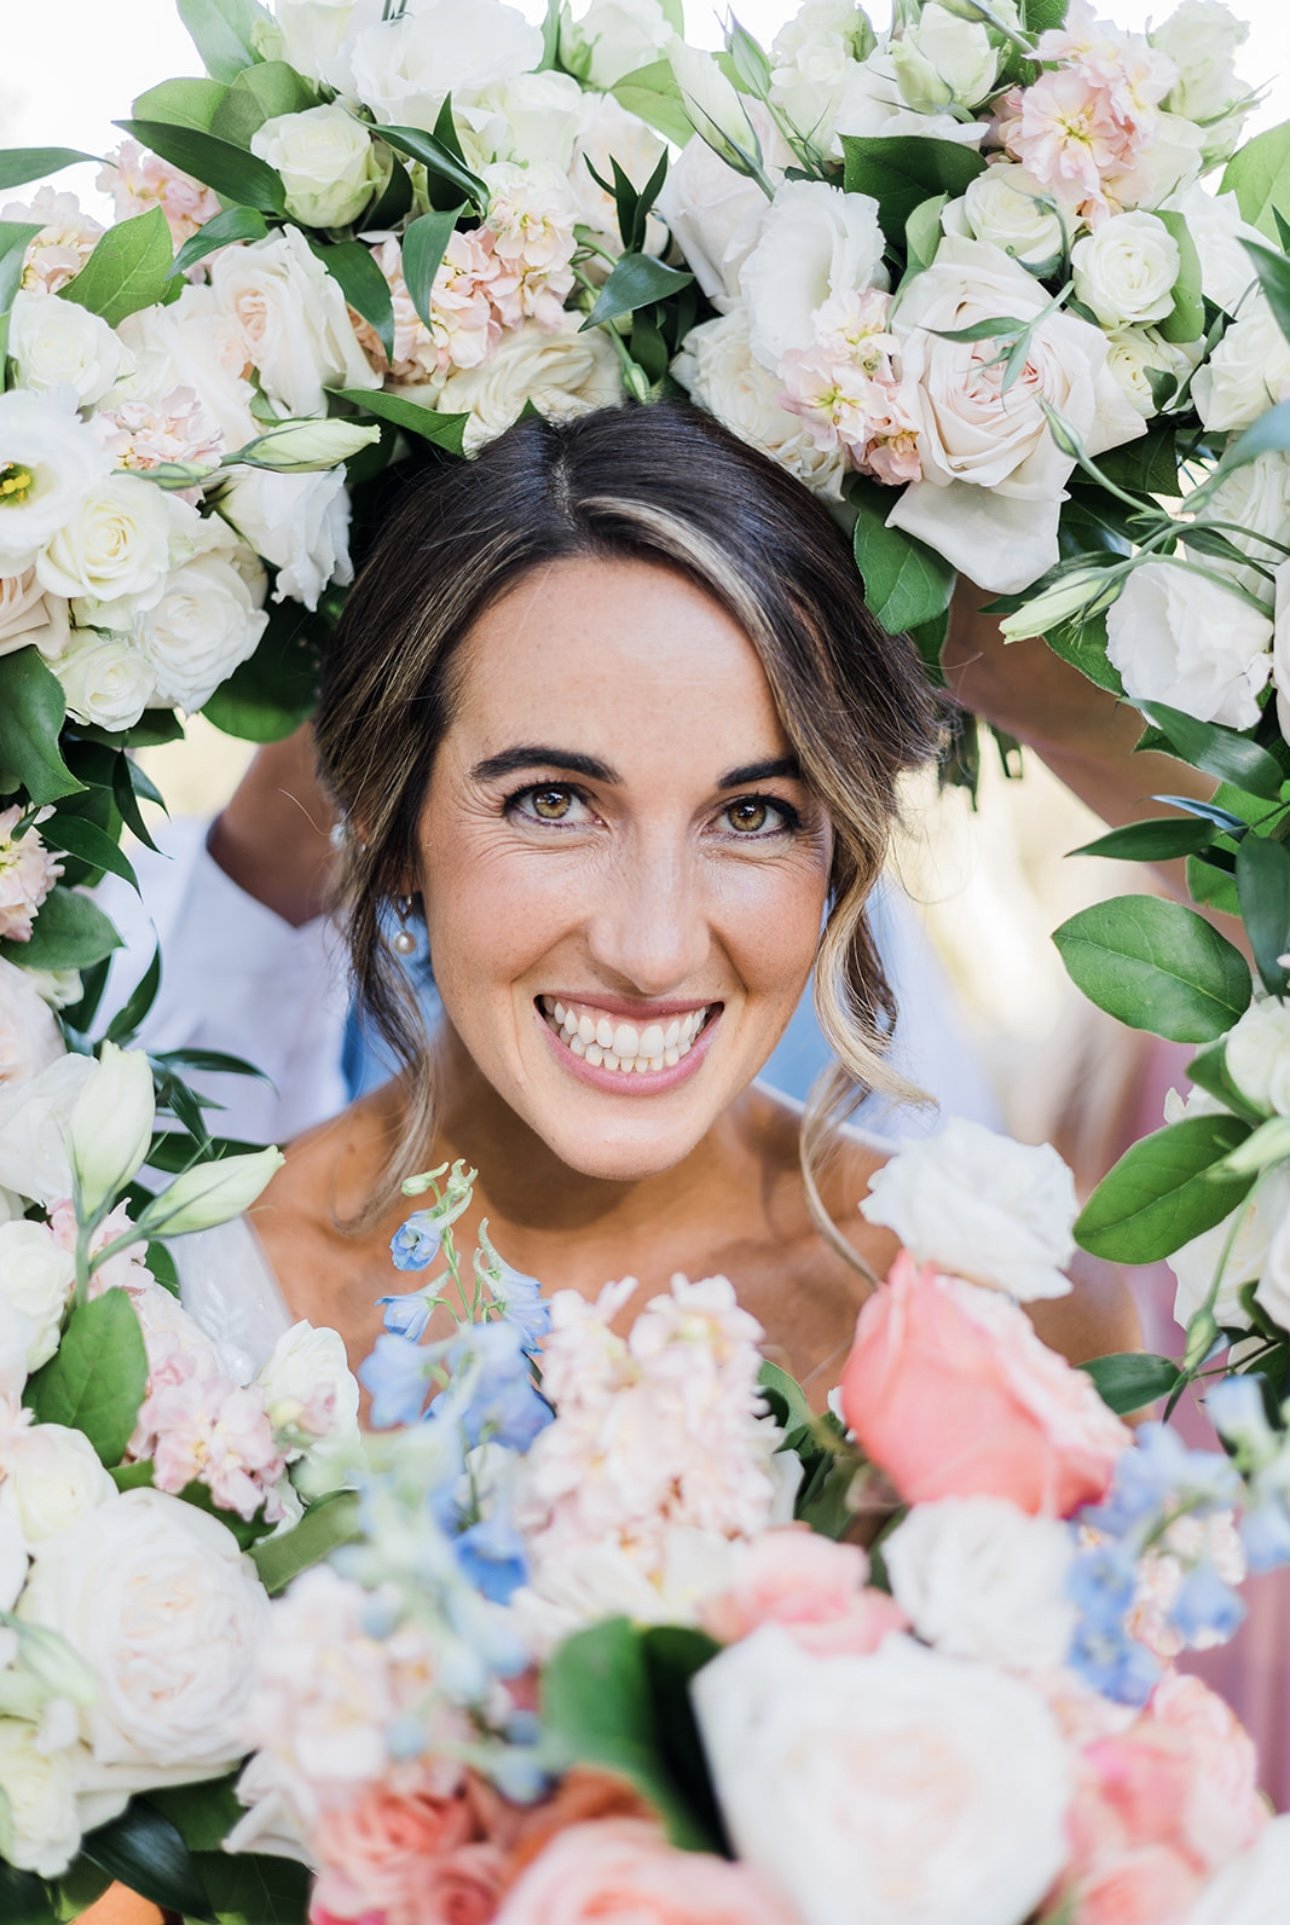 www.santabarbarawedding.com | RG Photography | Events by Fran | Godric Grove | Tangled Lotus | Bride’s Face Surrounded by Pastel Florals